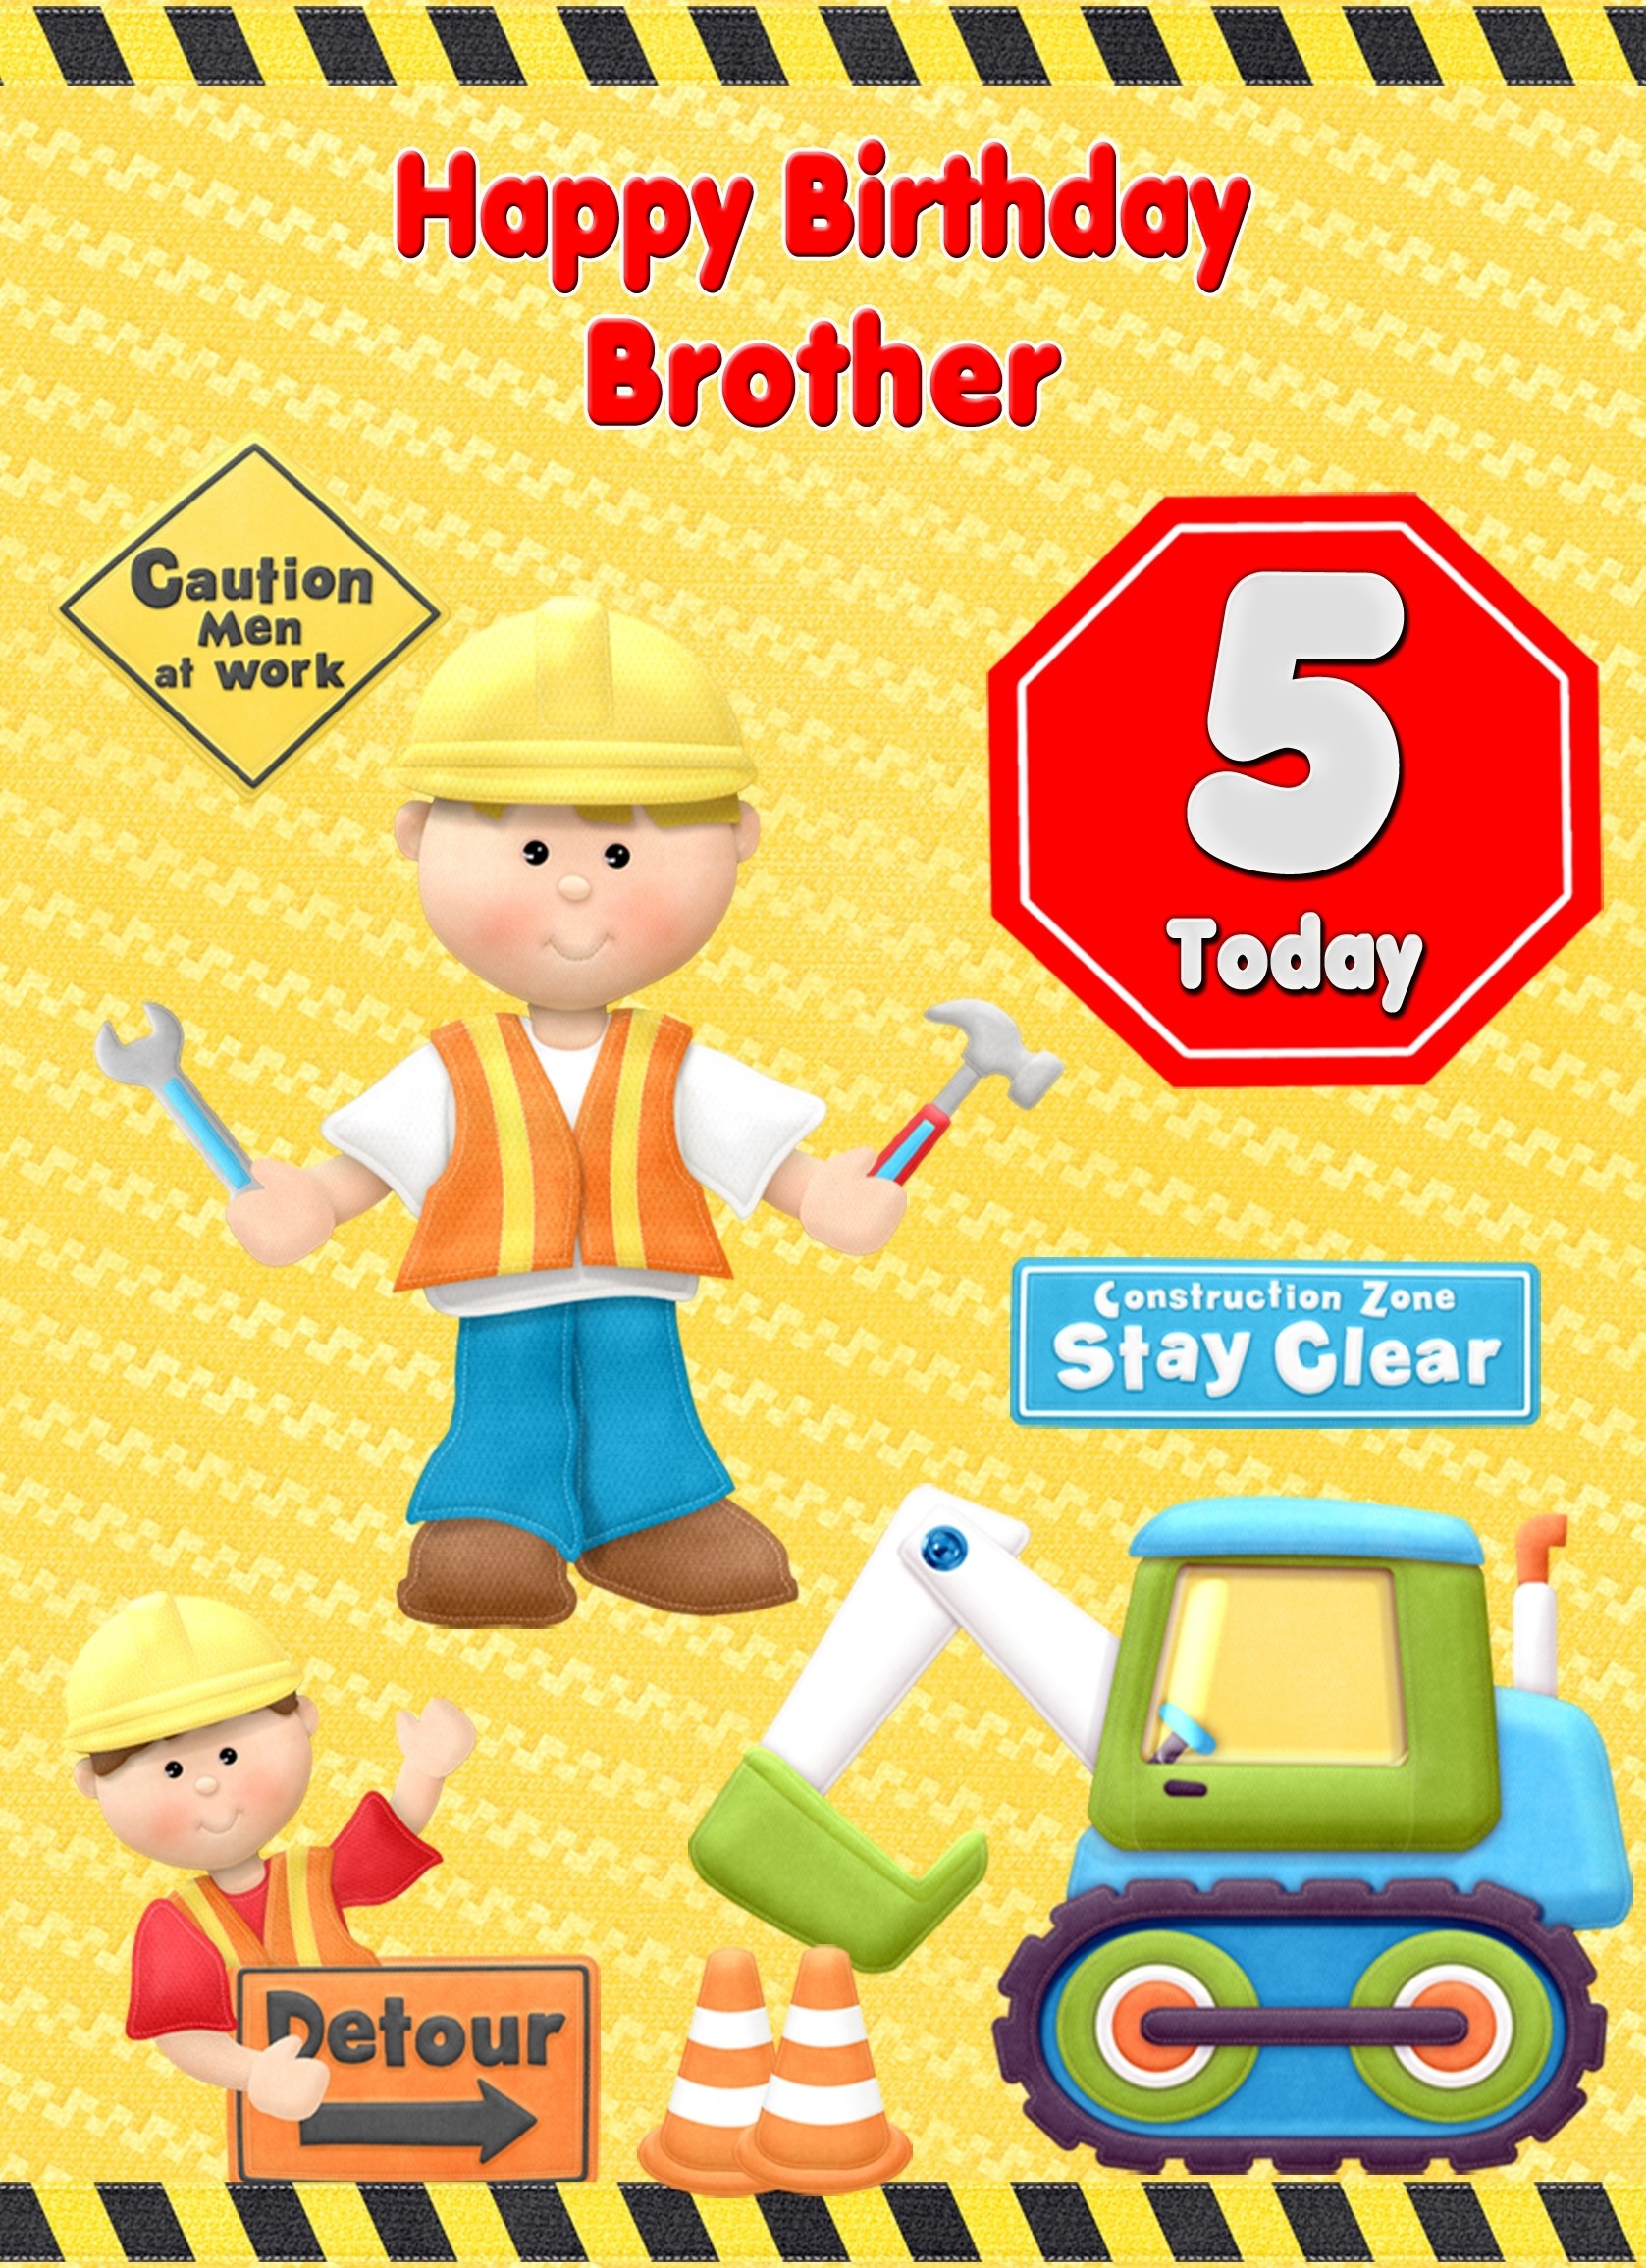 Kids 5th Birthday Builder Cartoon Card for Brother